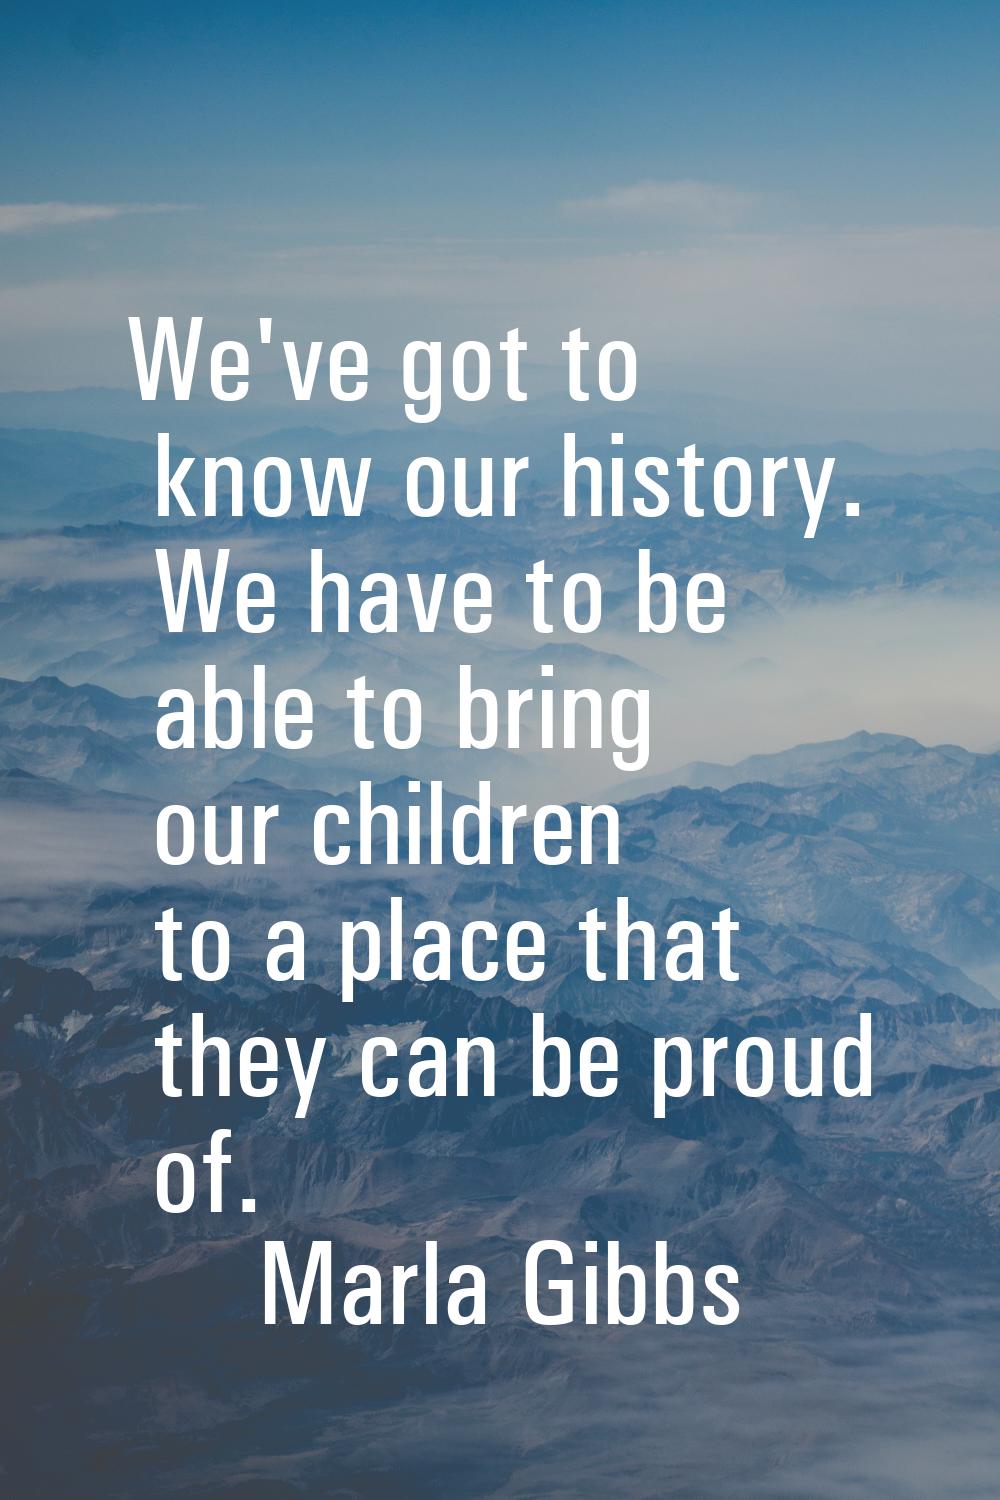 We've got to know our history. We have to be able to bring our children to a place that they can be